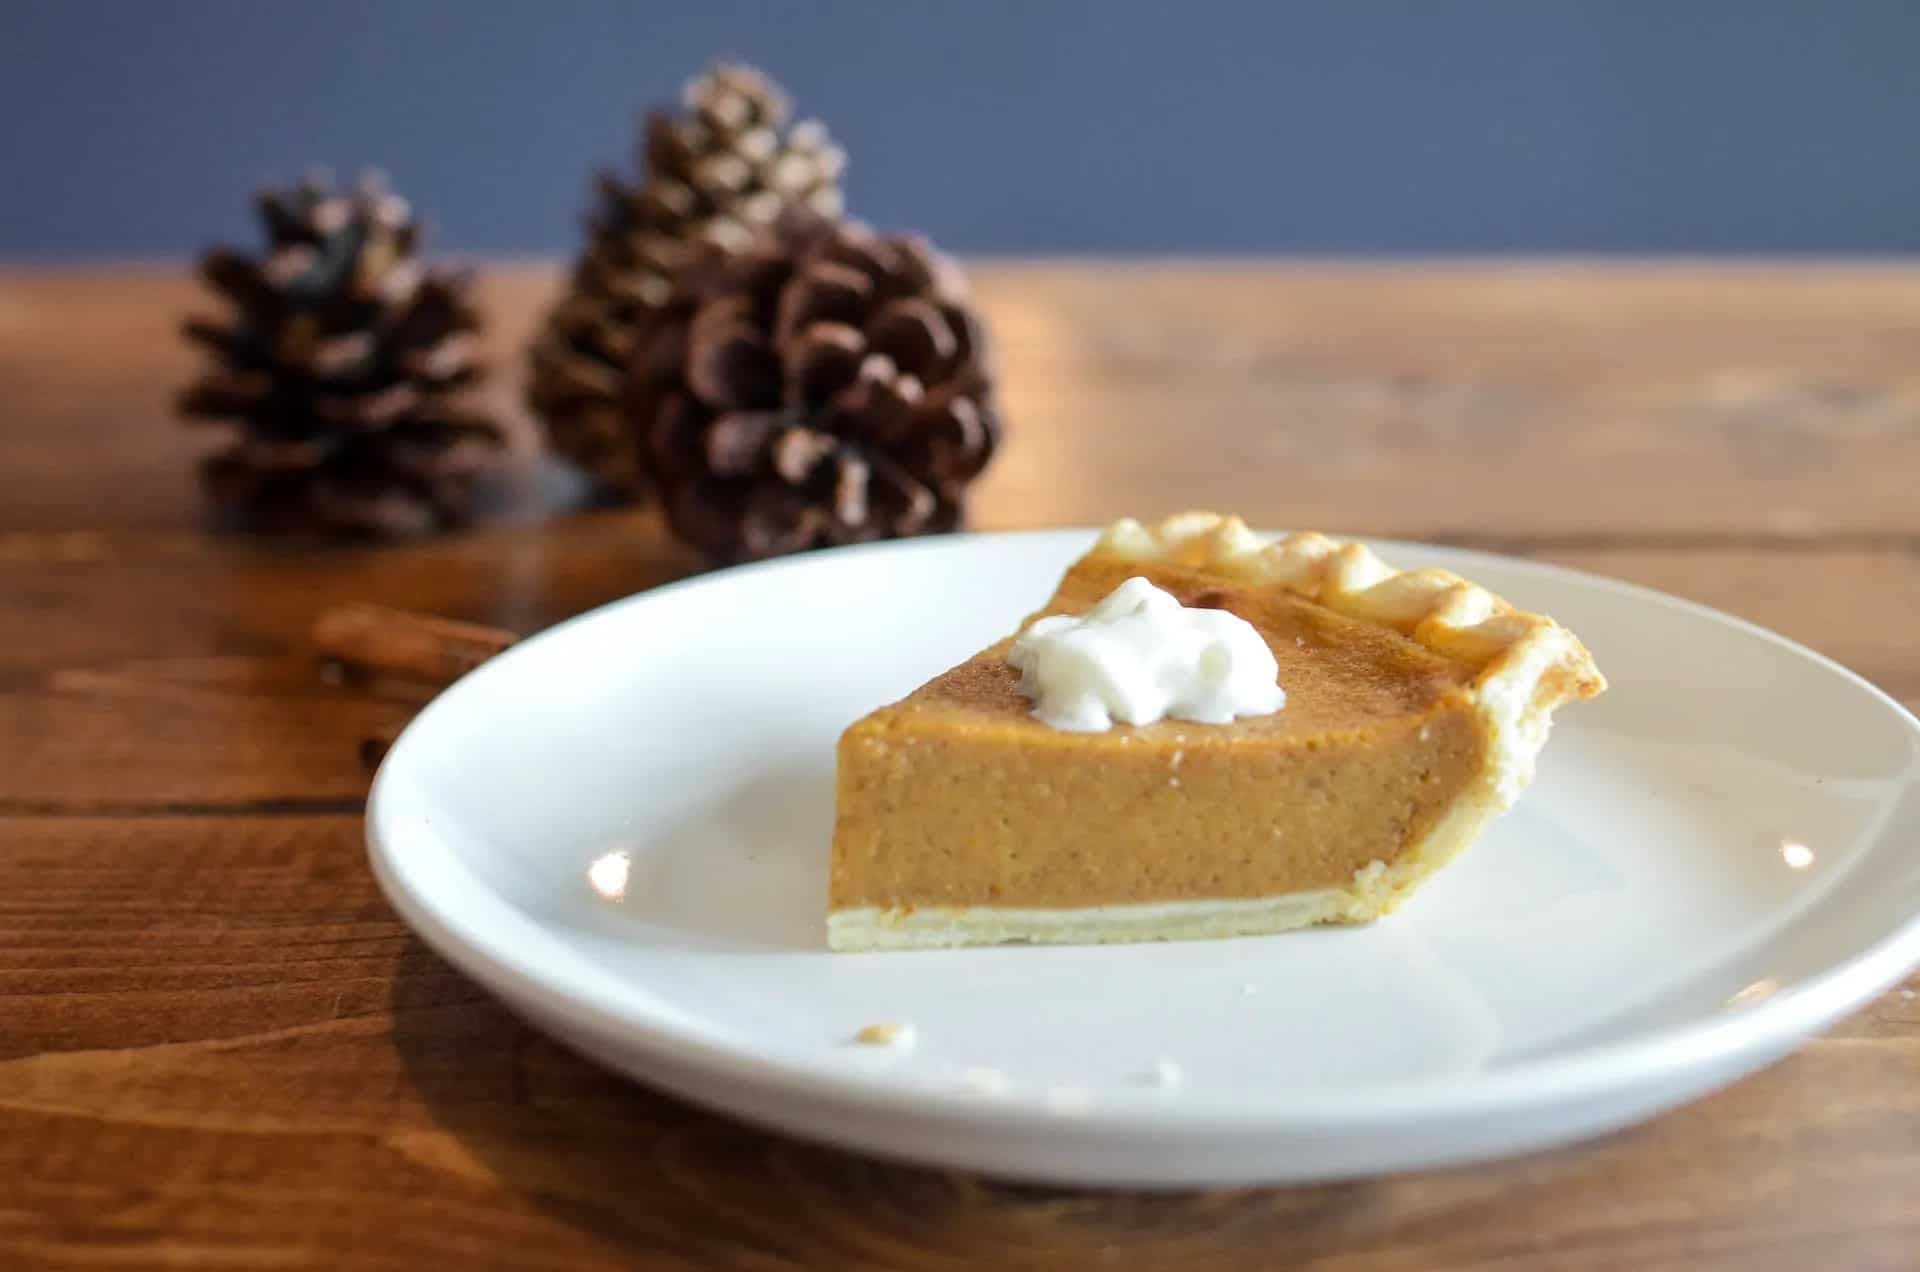 Uncovering Delicious History Of 400-Year-Old Pumpkin Pie Recipe